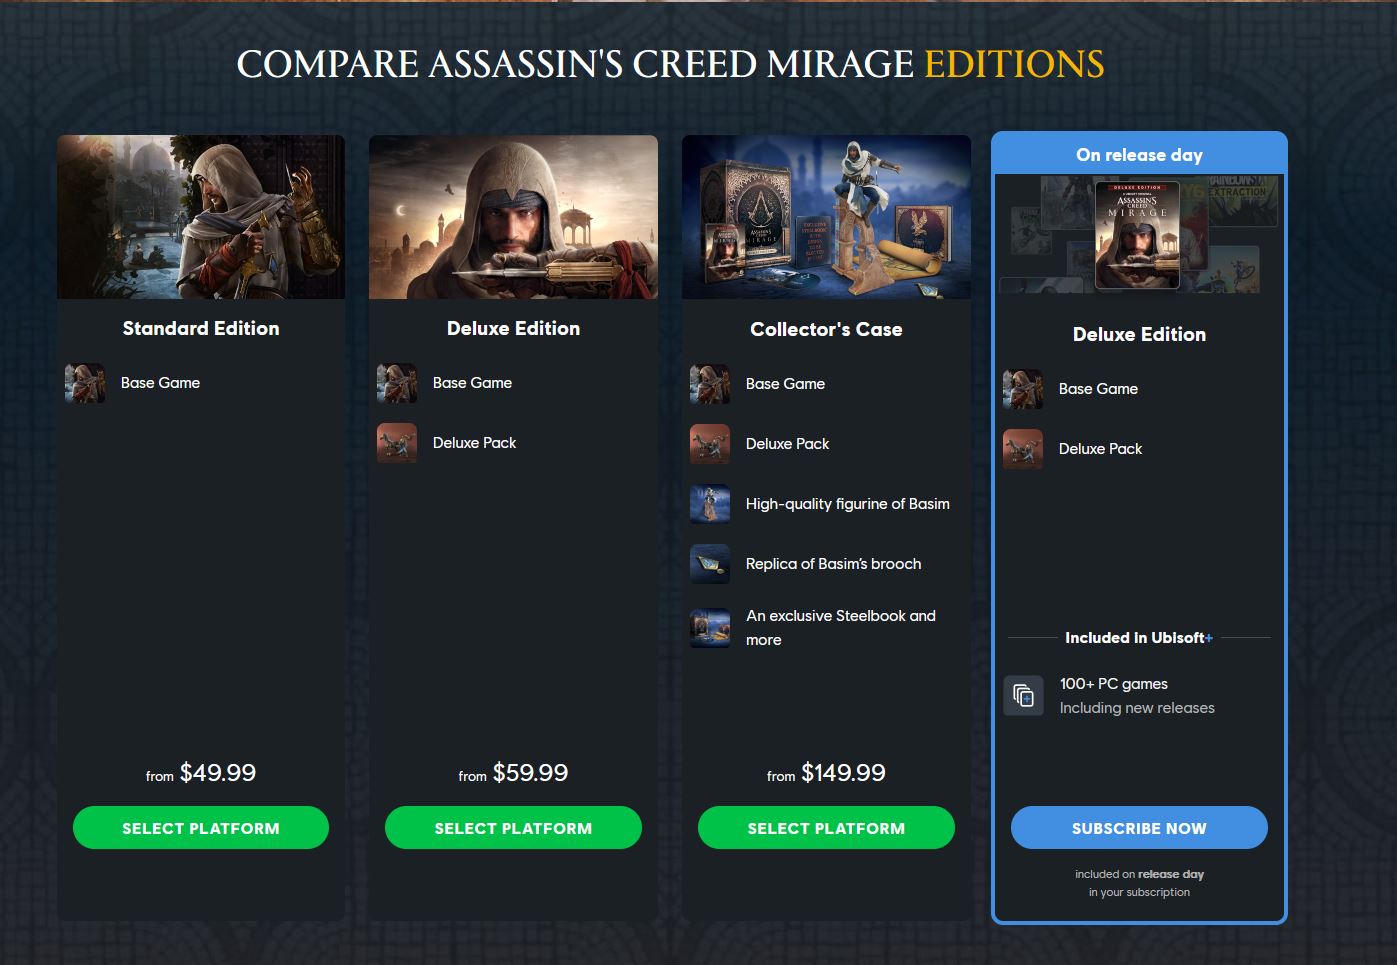 Assassin's Creed Mirage Deluxe Edition Announced 